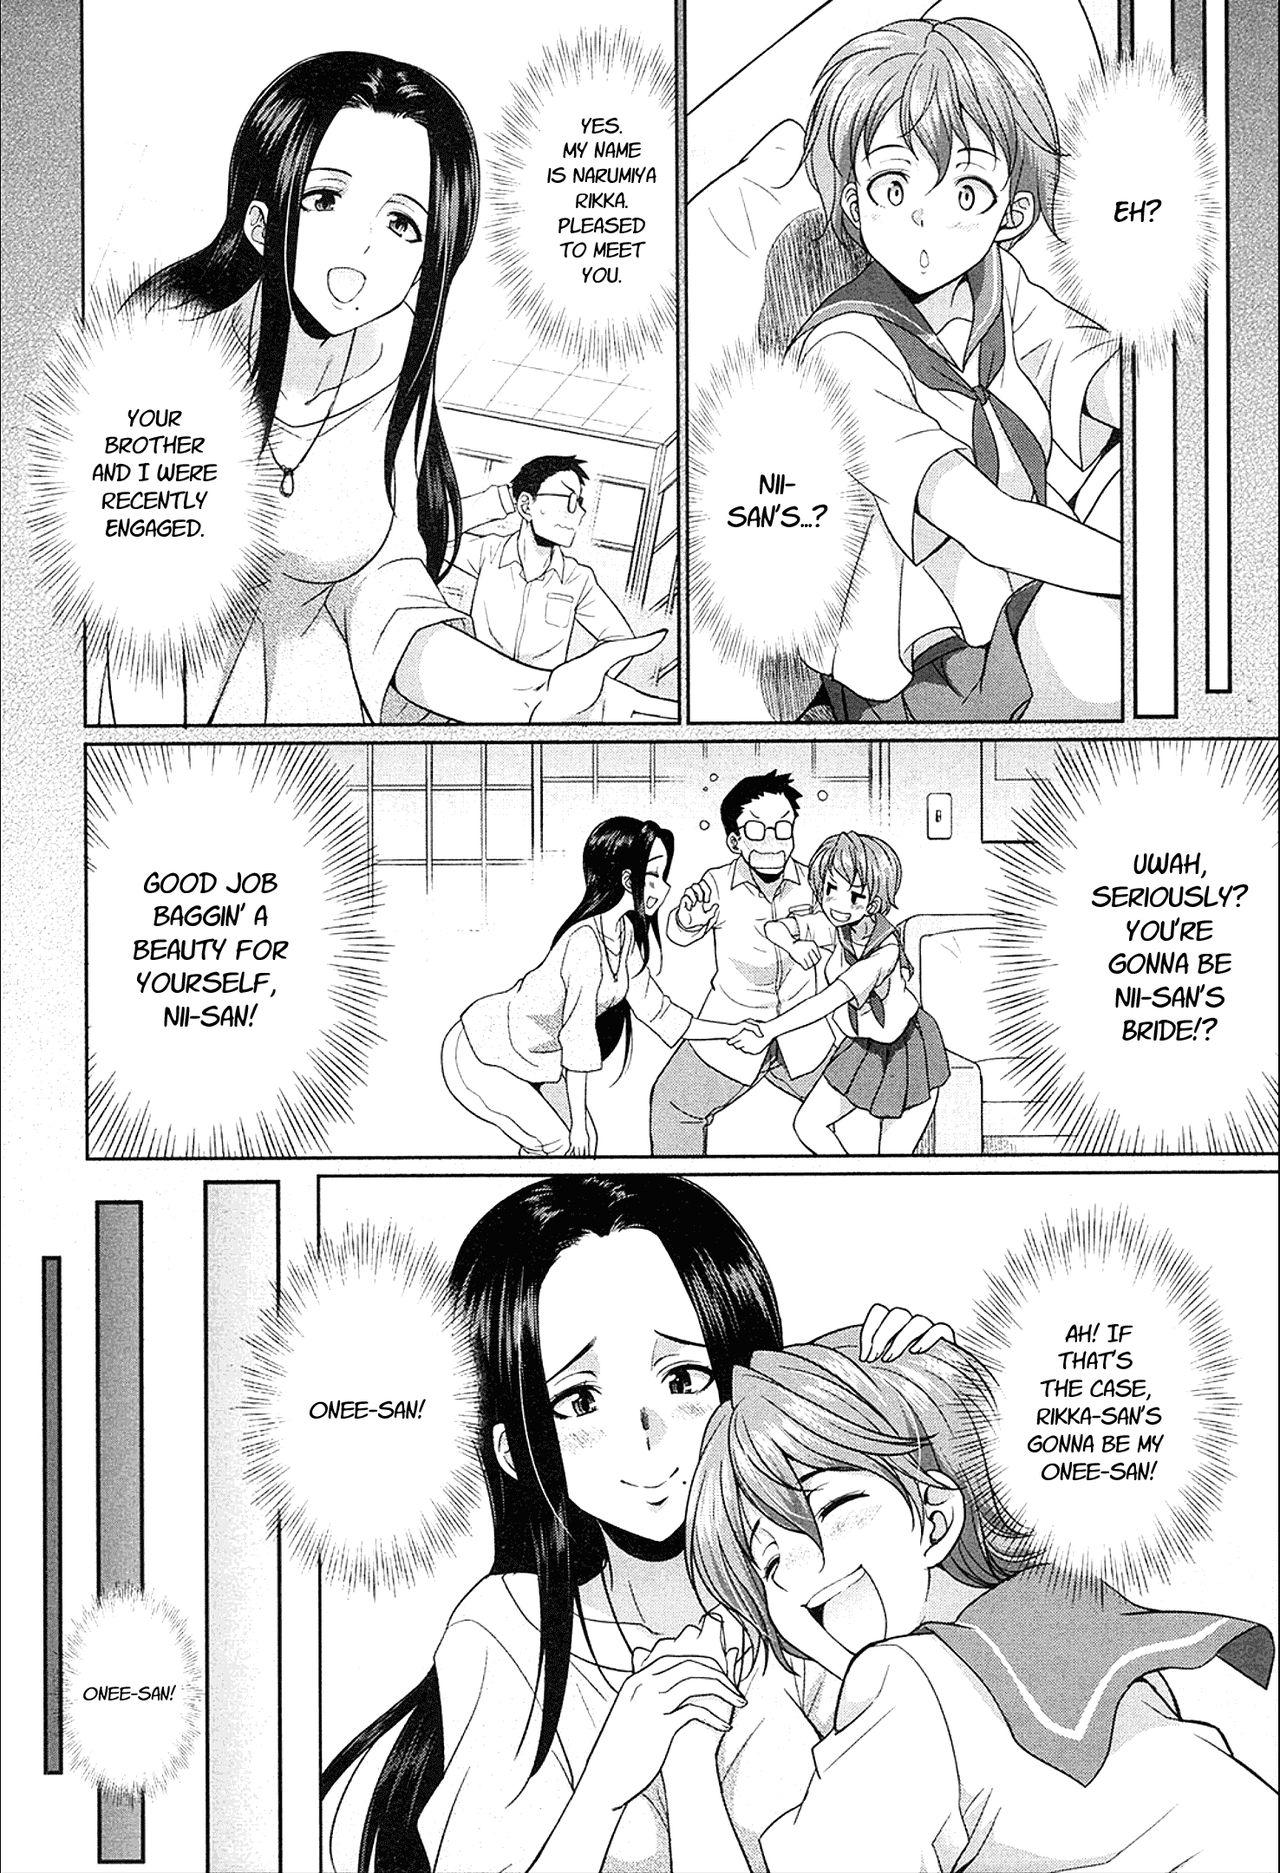 Pussy Sex Gishimai no Kankei The Relationship of the Sisters-in-Law Original Script Uncensored First Time - Page 4